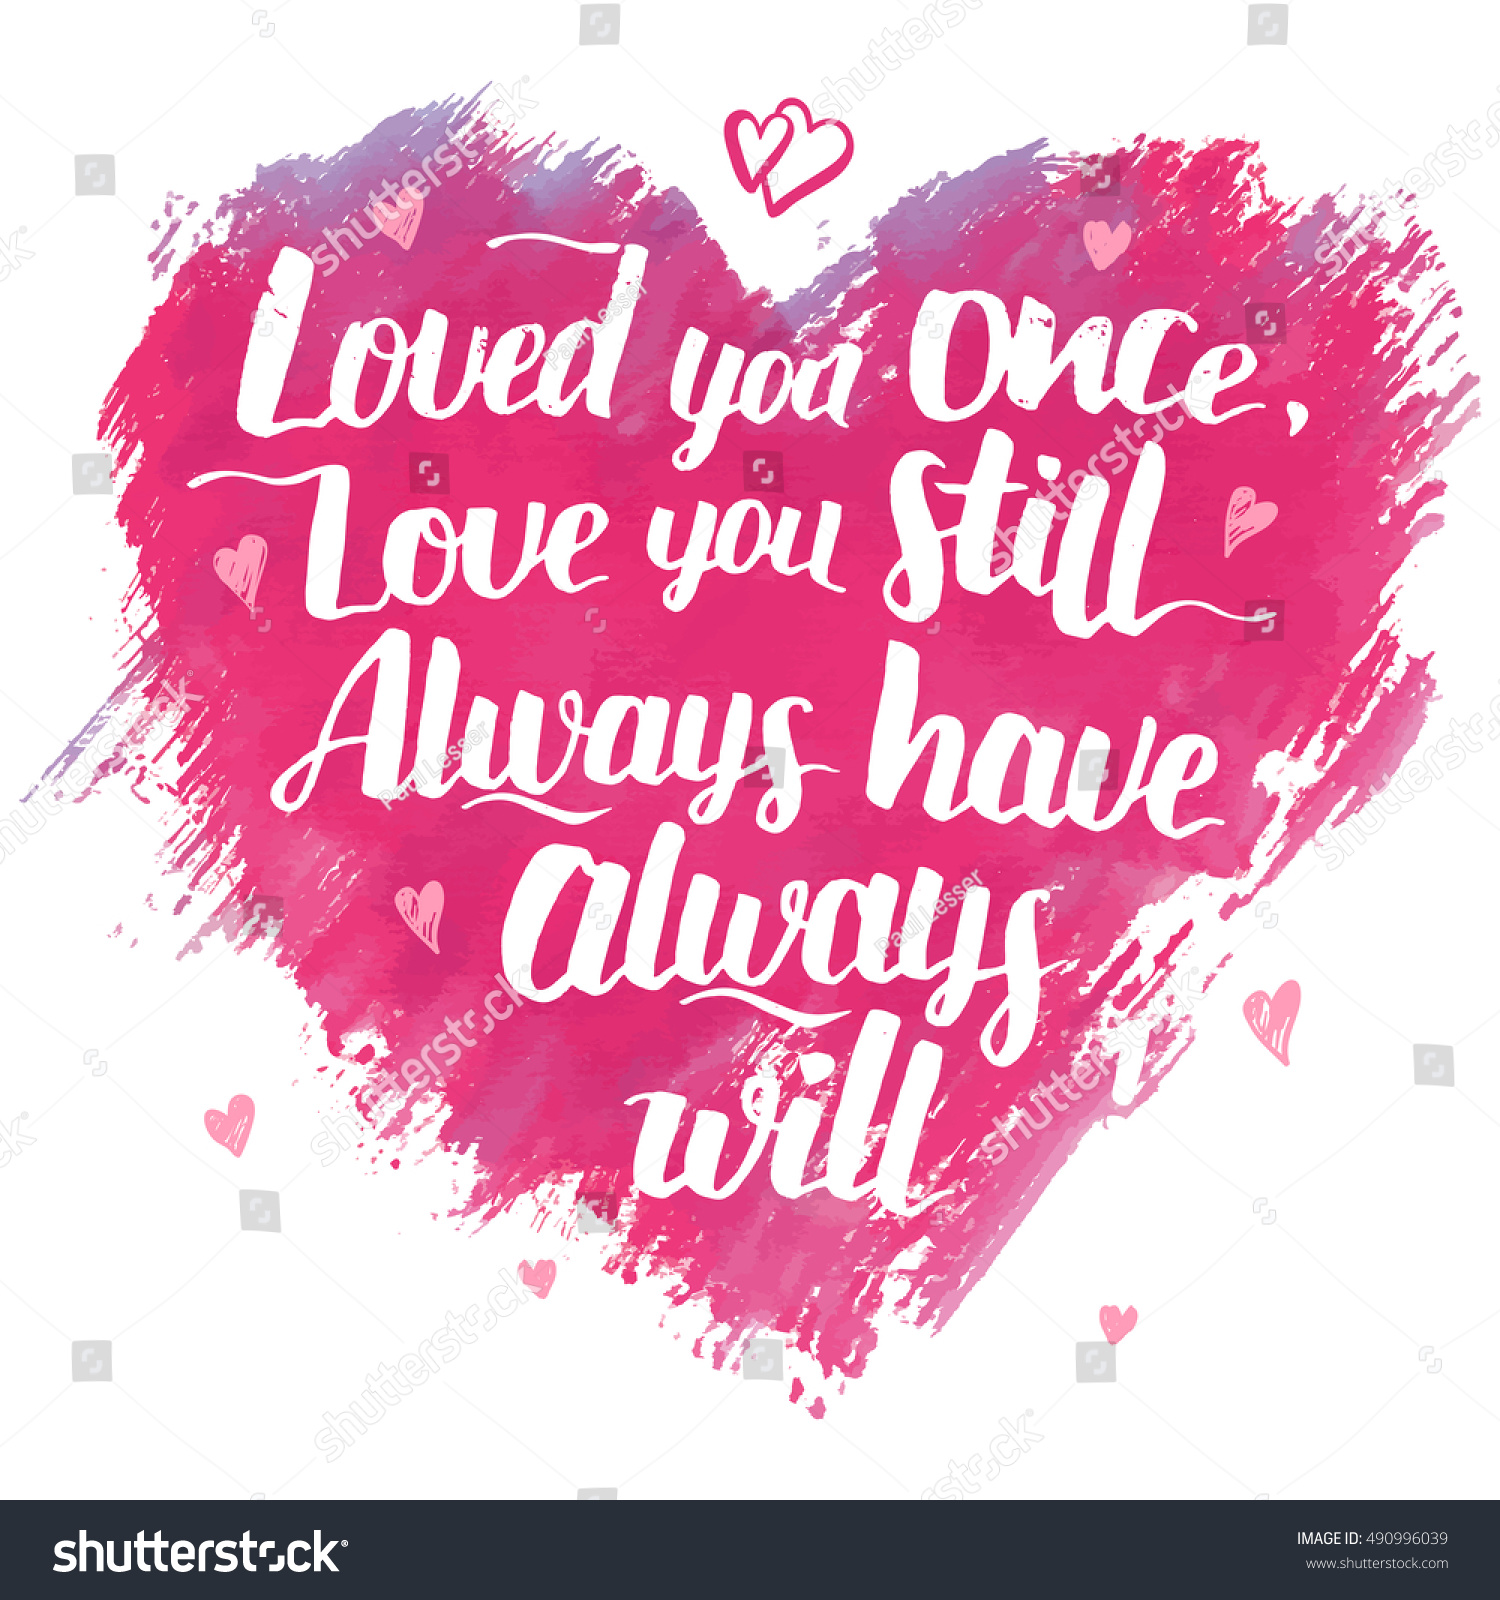 Love you once love you still Always have always will Brush calligraphy